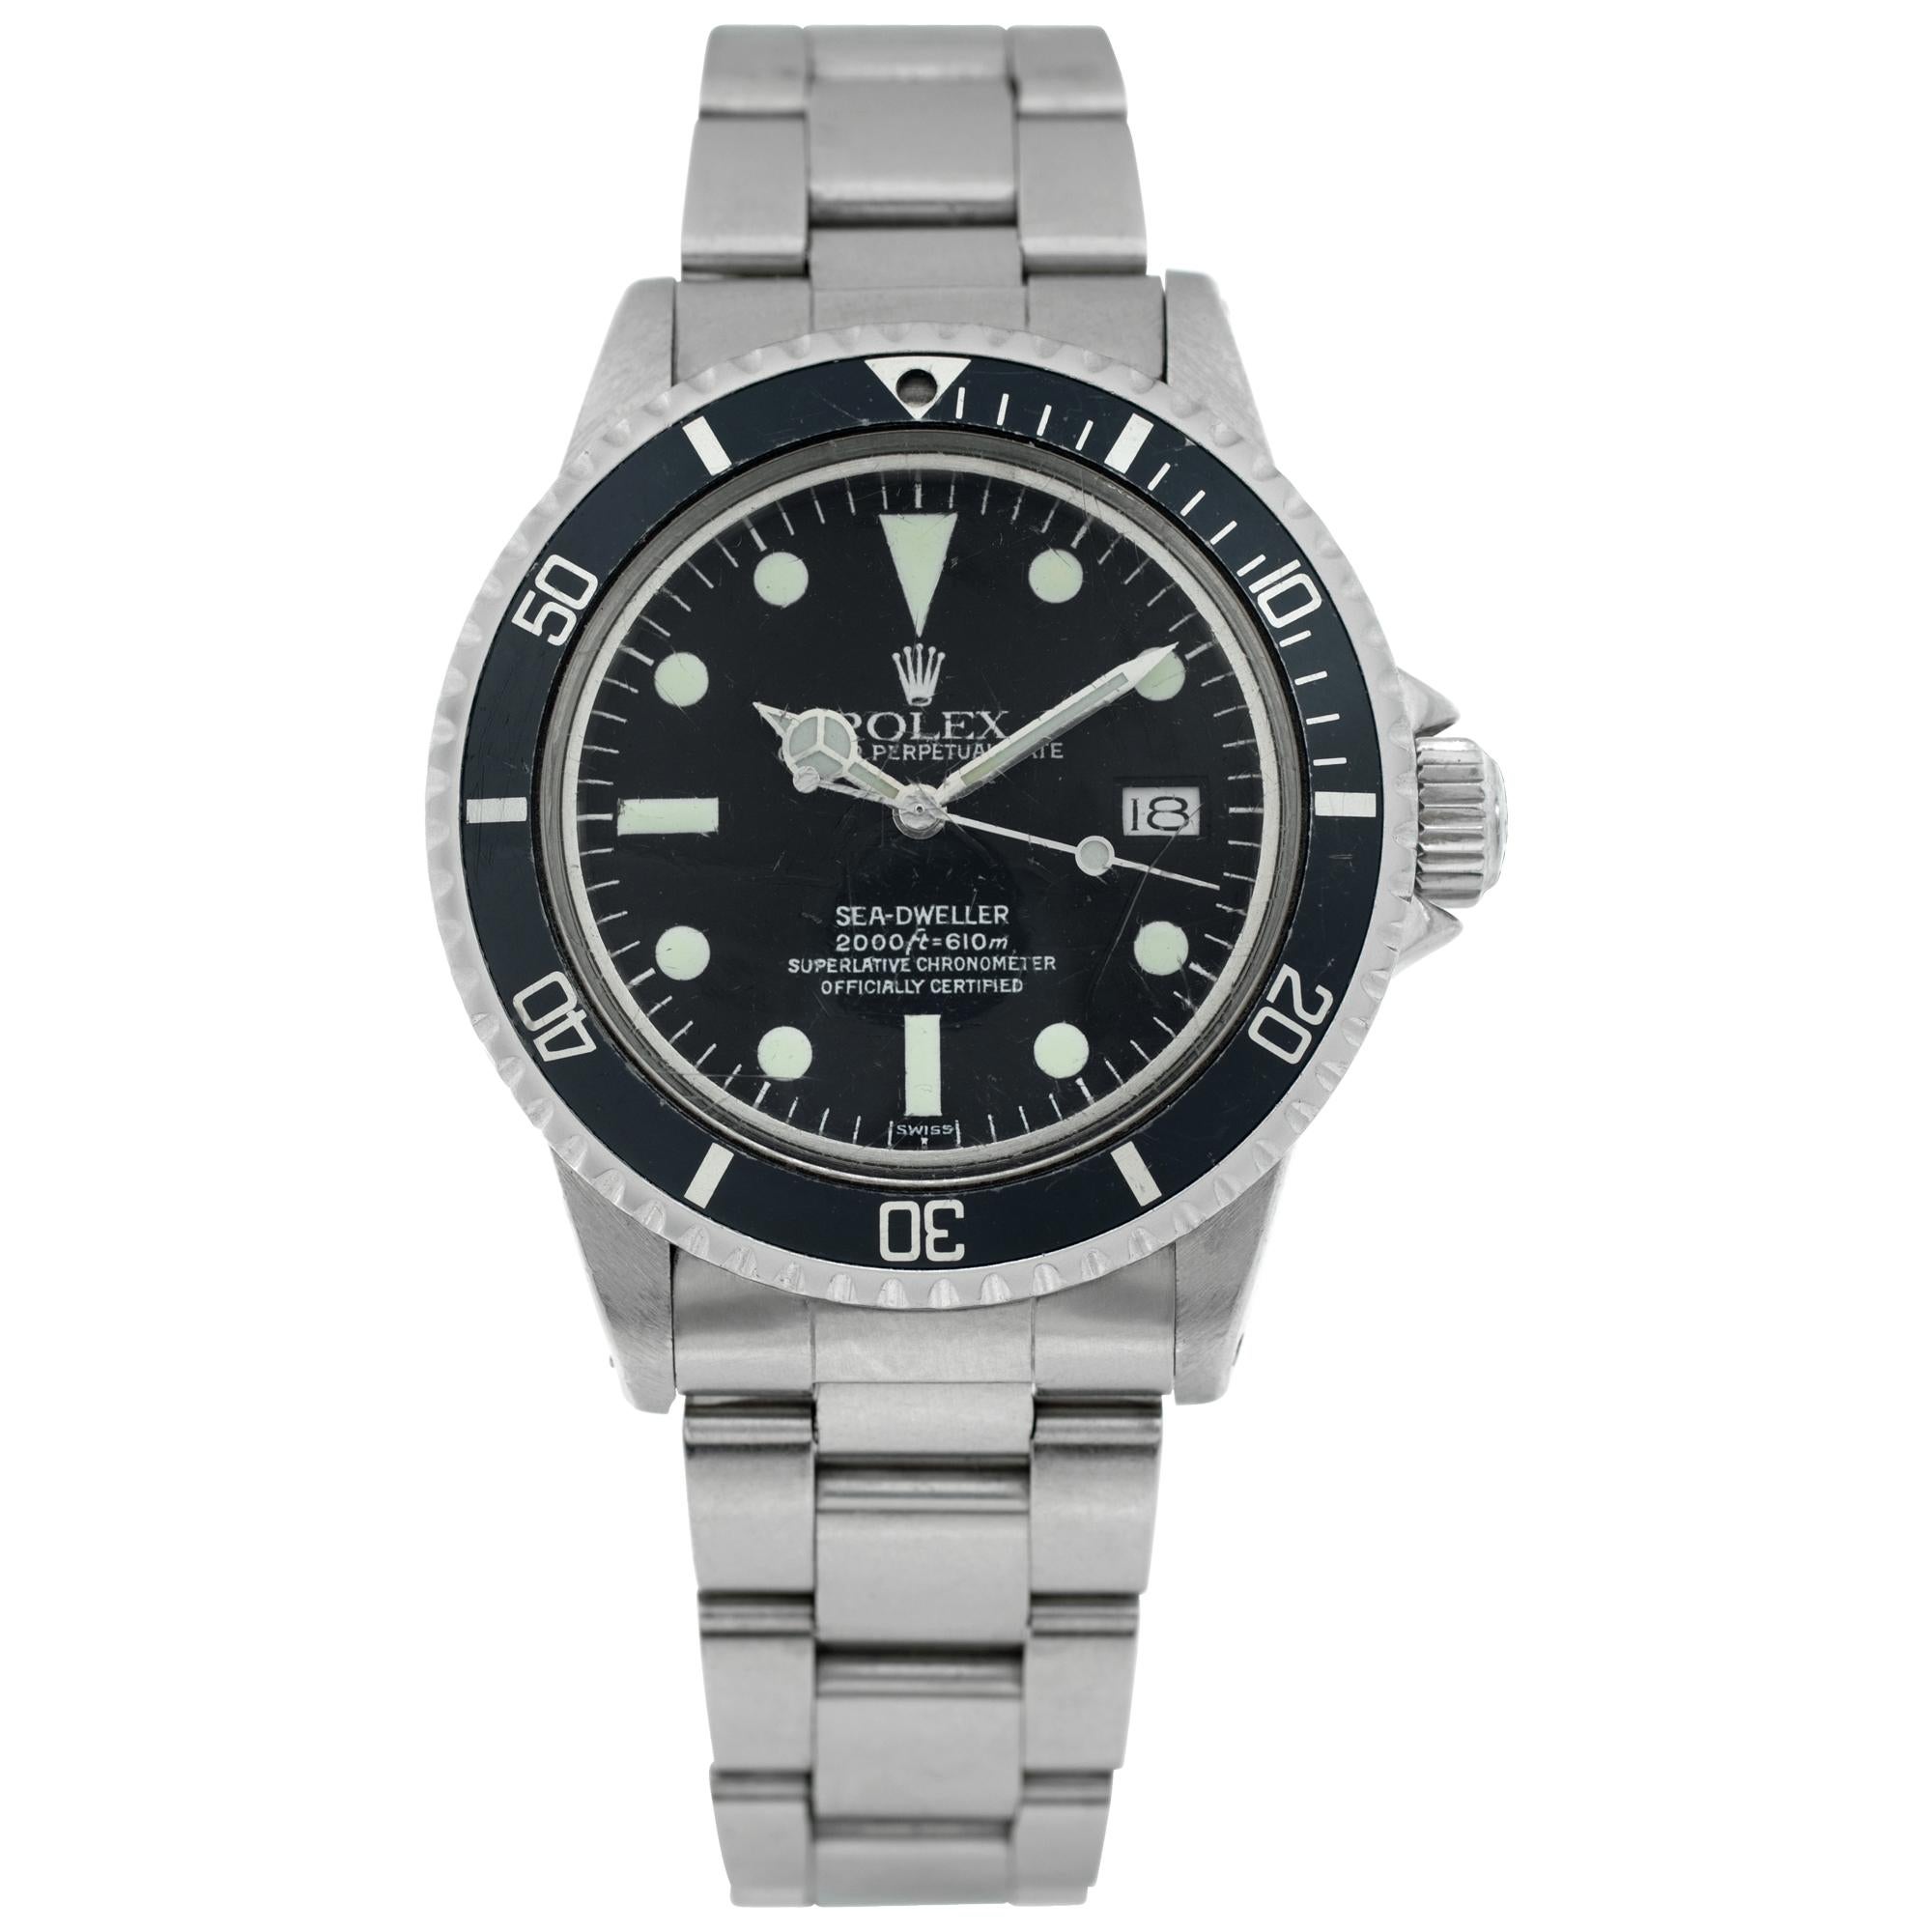 Rolex Sea-Dweller stainless steel Automatic Wristwatch Ref 1665 For Sale